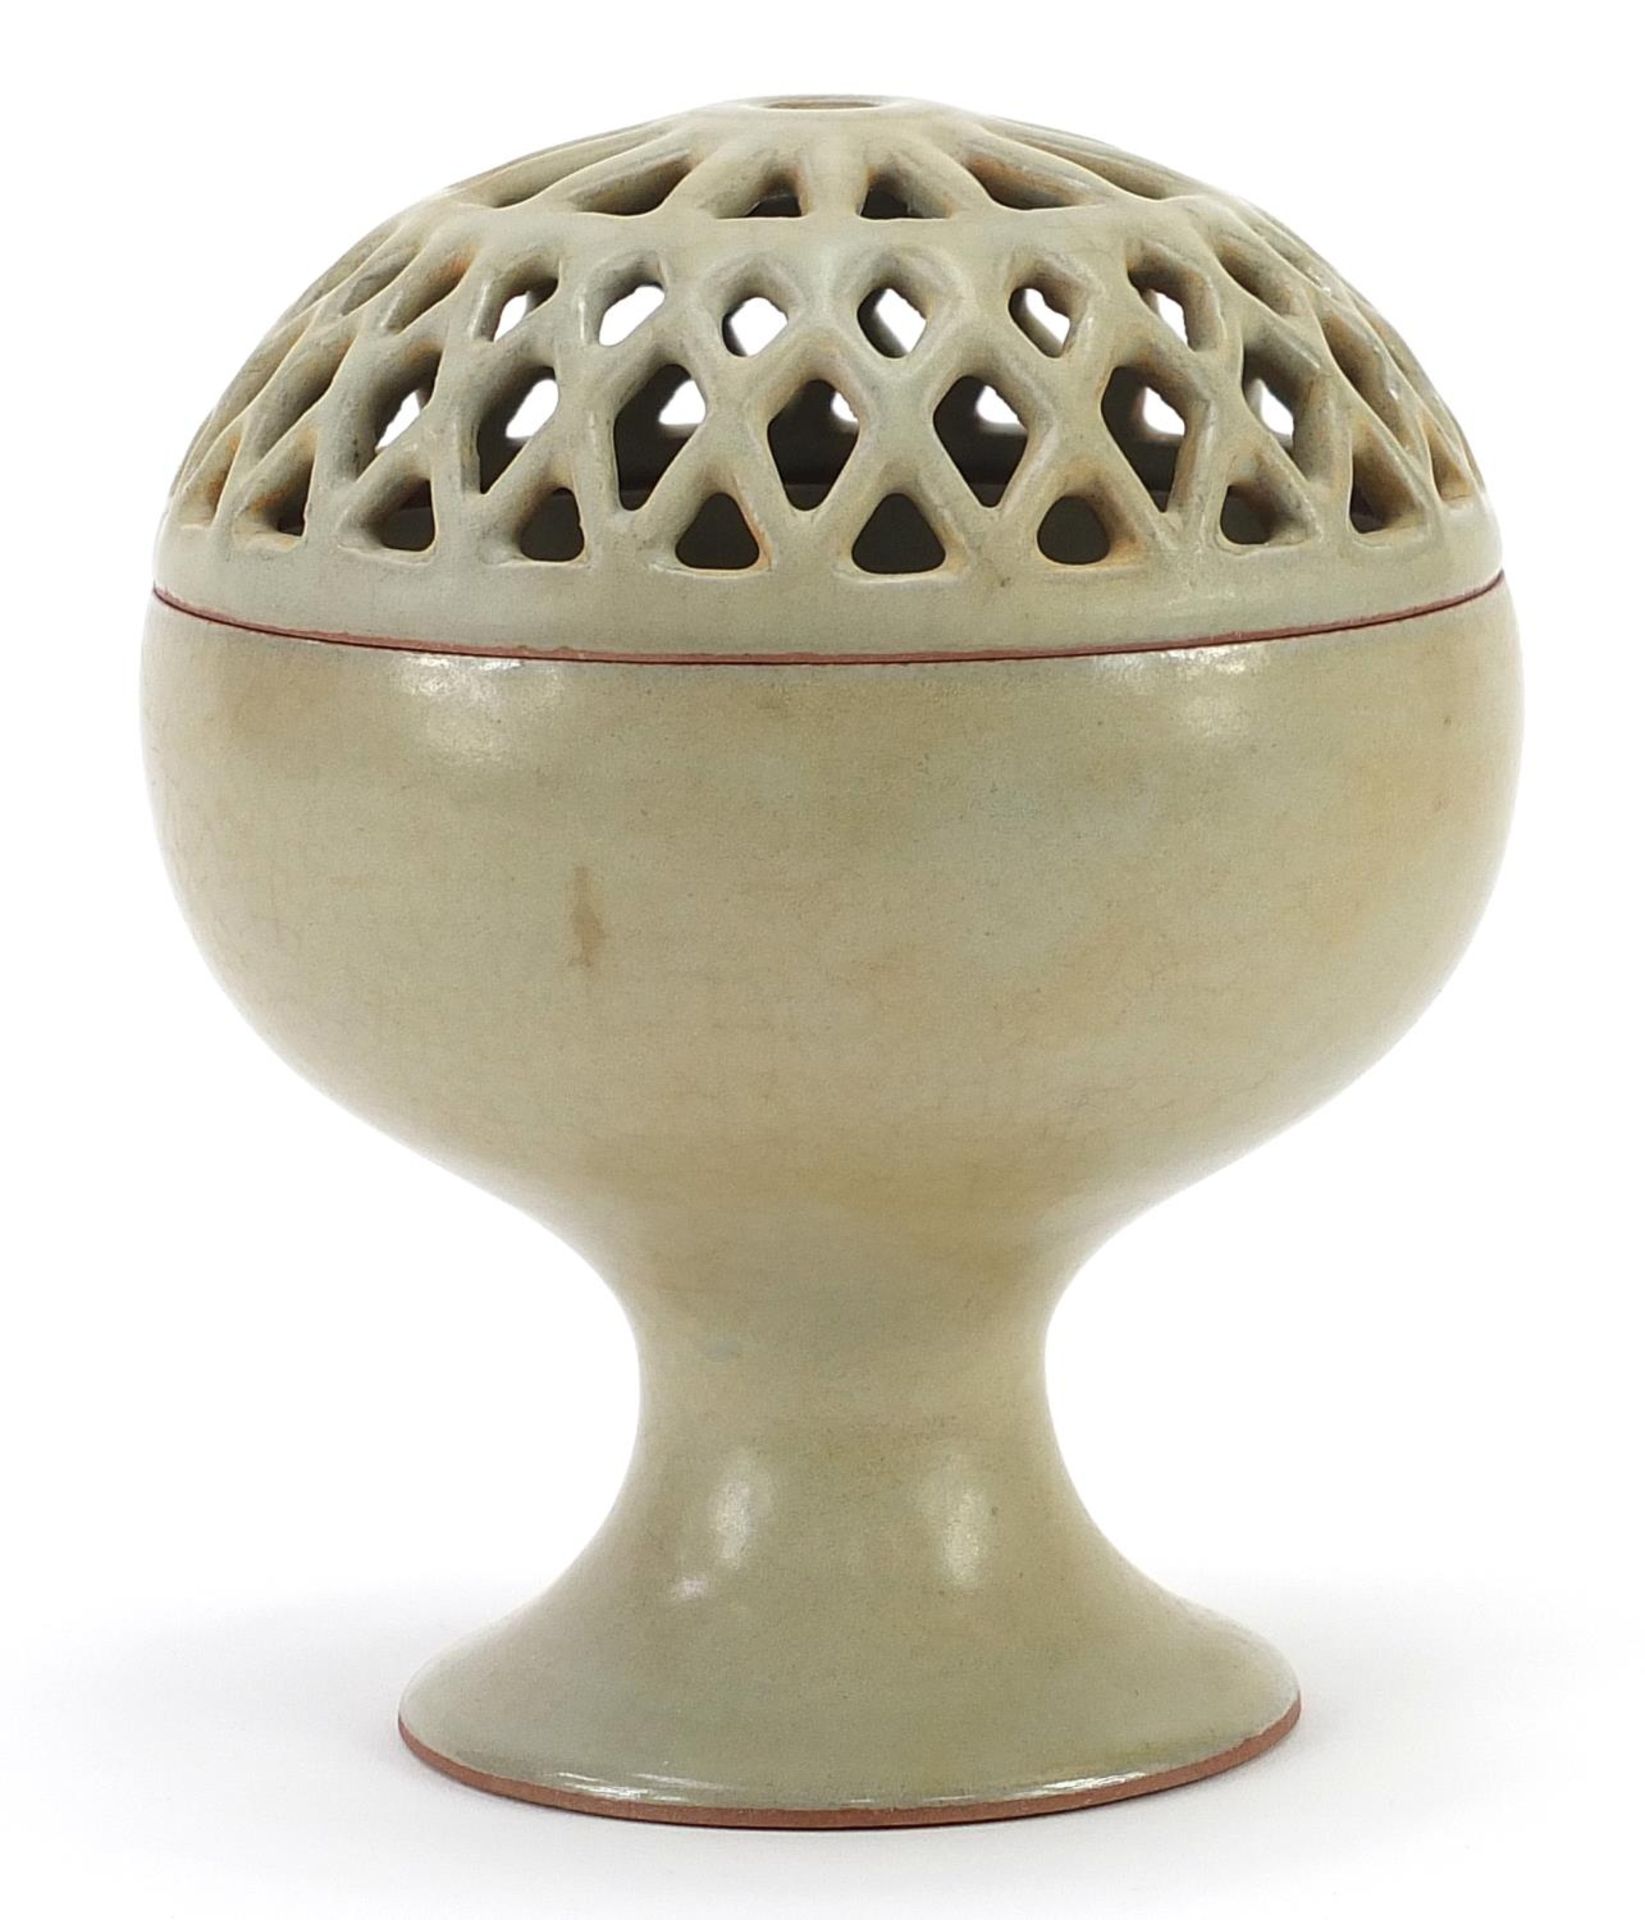 Chinese porcelain pedestal bowl with pierced cover having a celadon glaze, 15.5cm high - Image 2 of 3